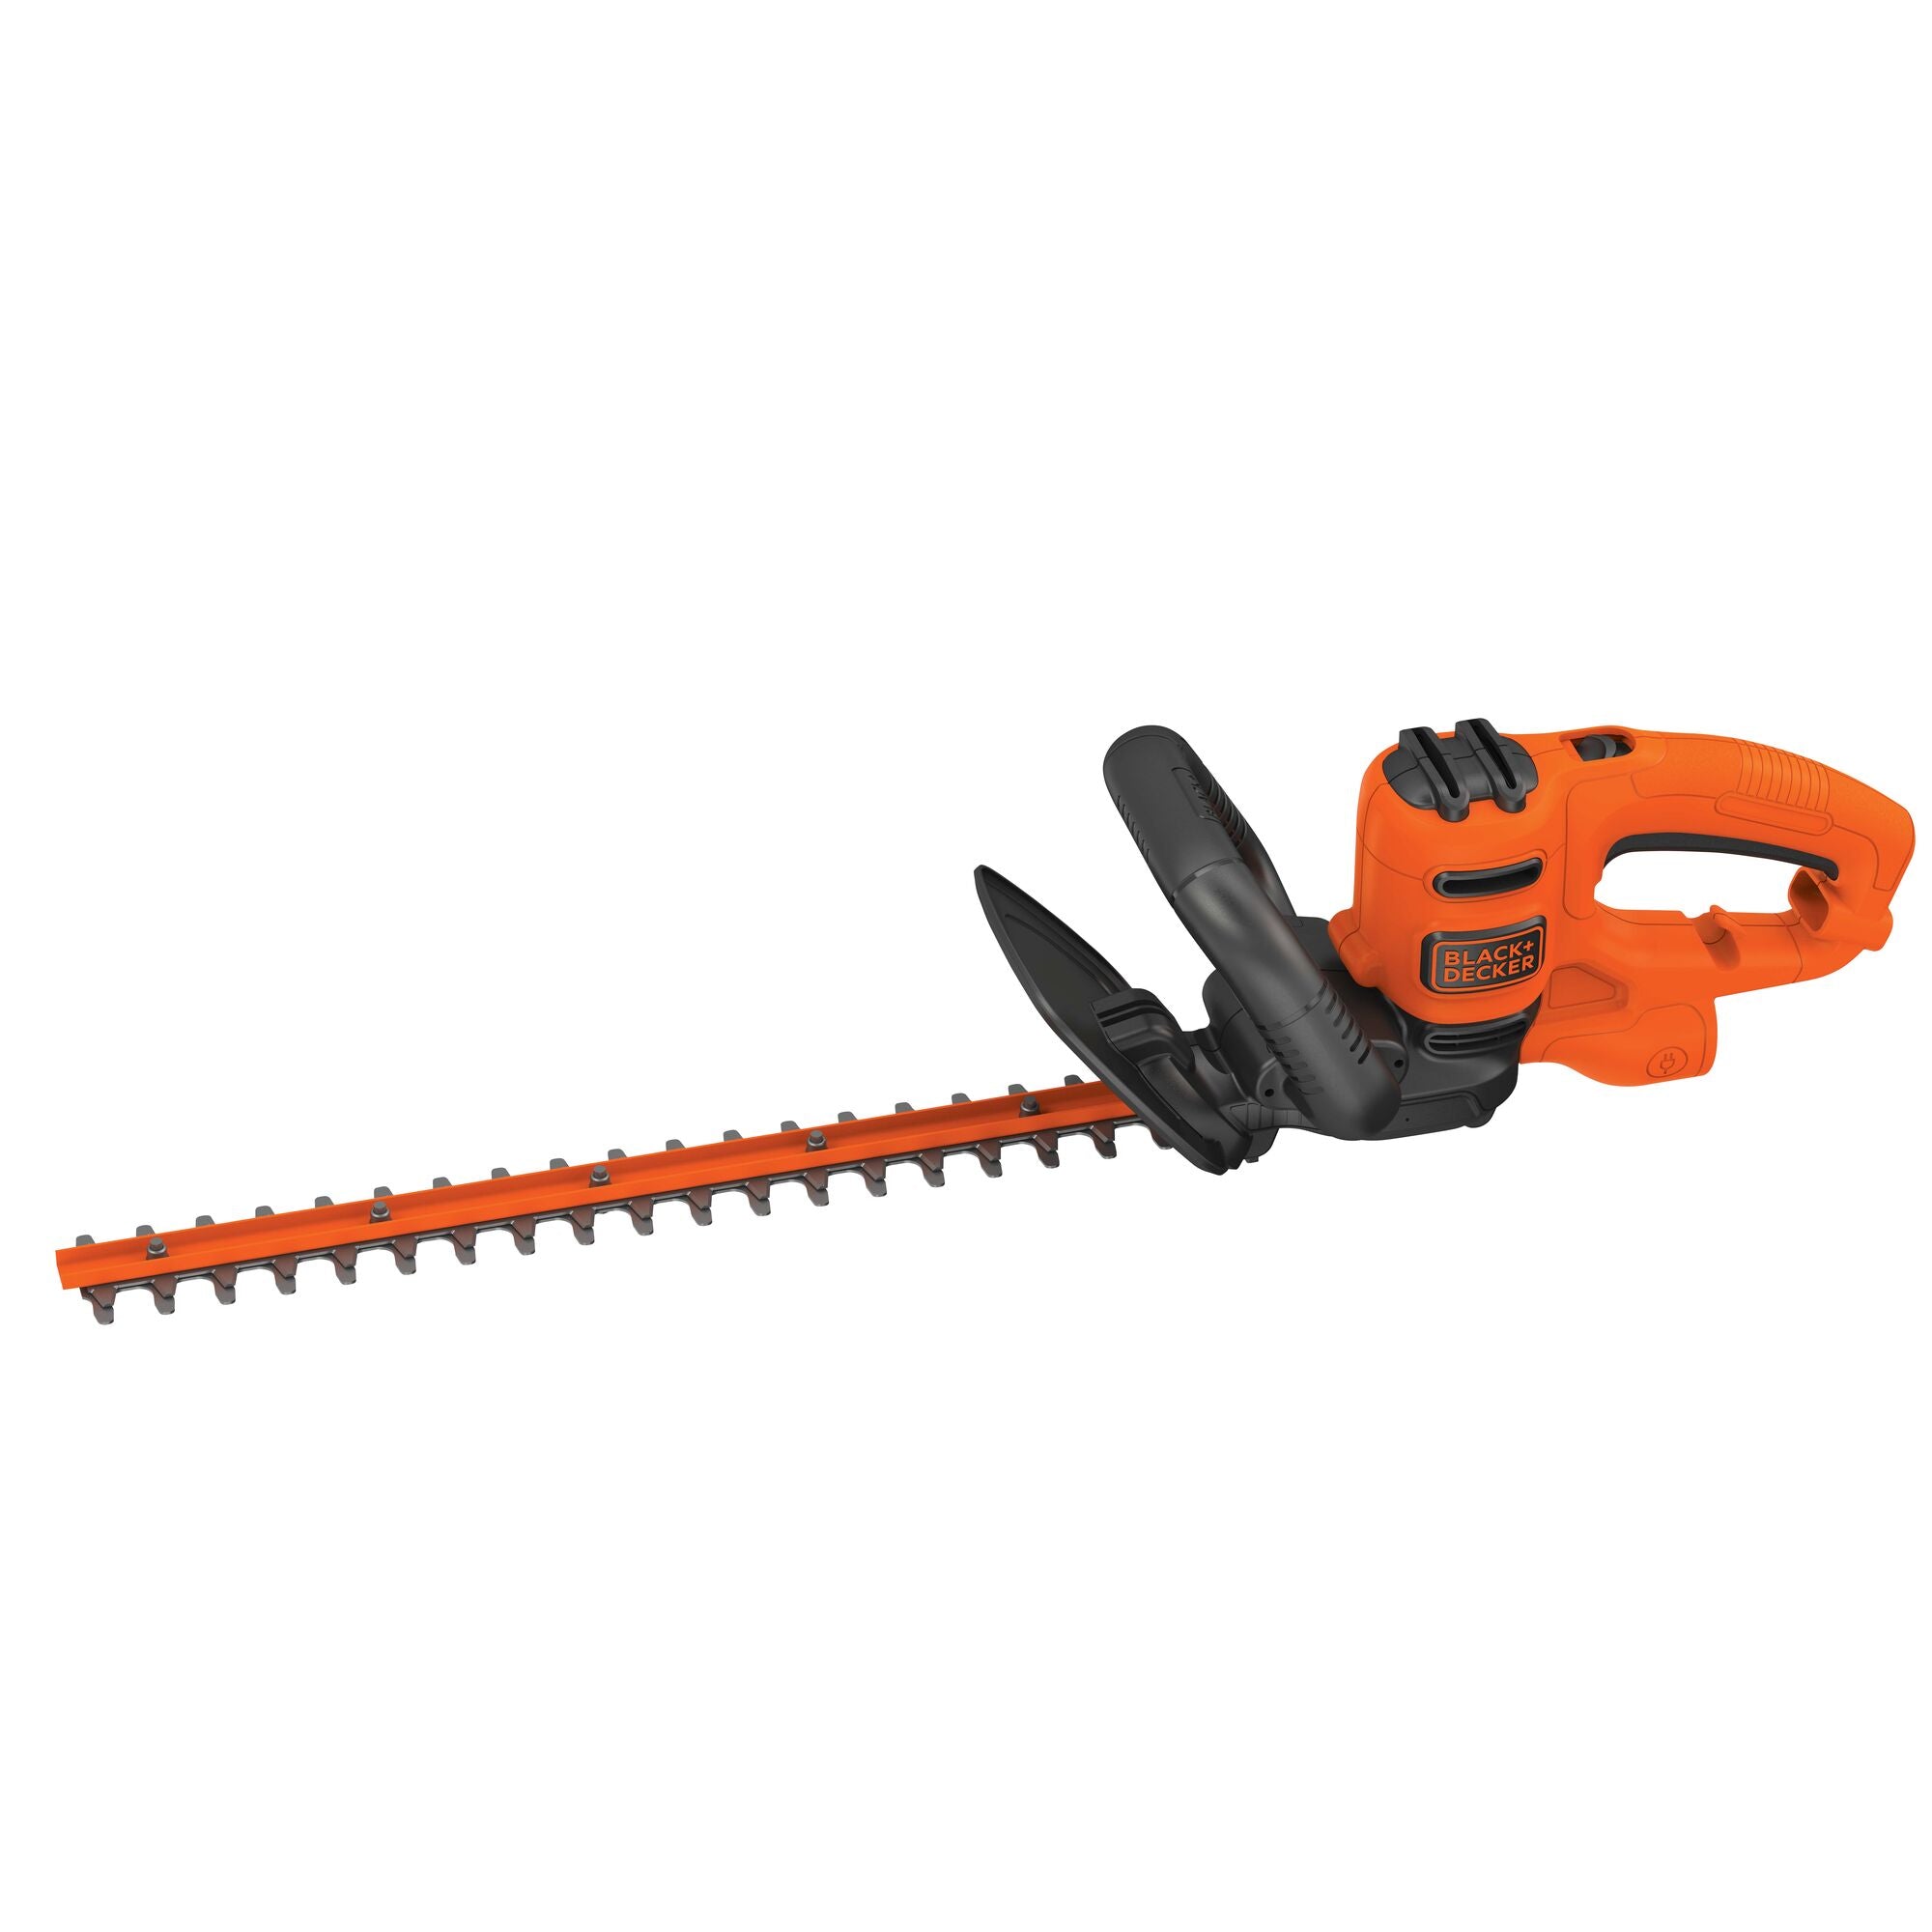 Black & Decker 18 inch Corded Dual-Action Hedge Trimmer